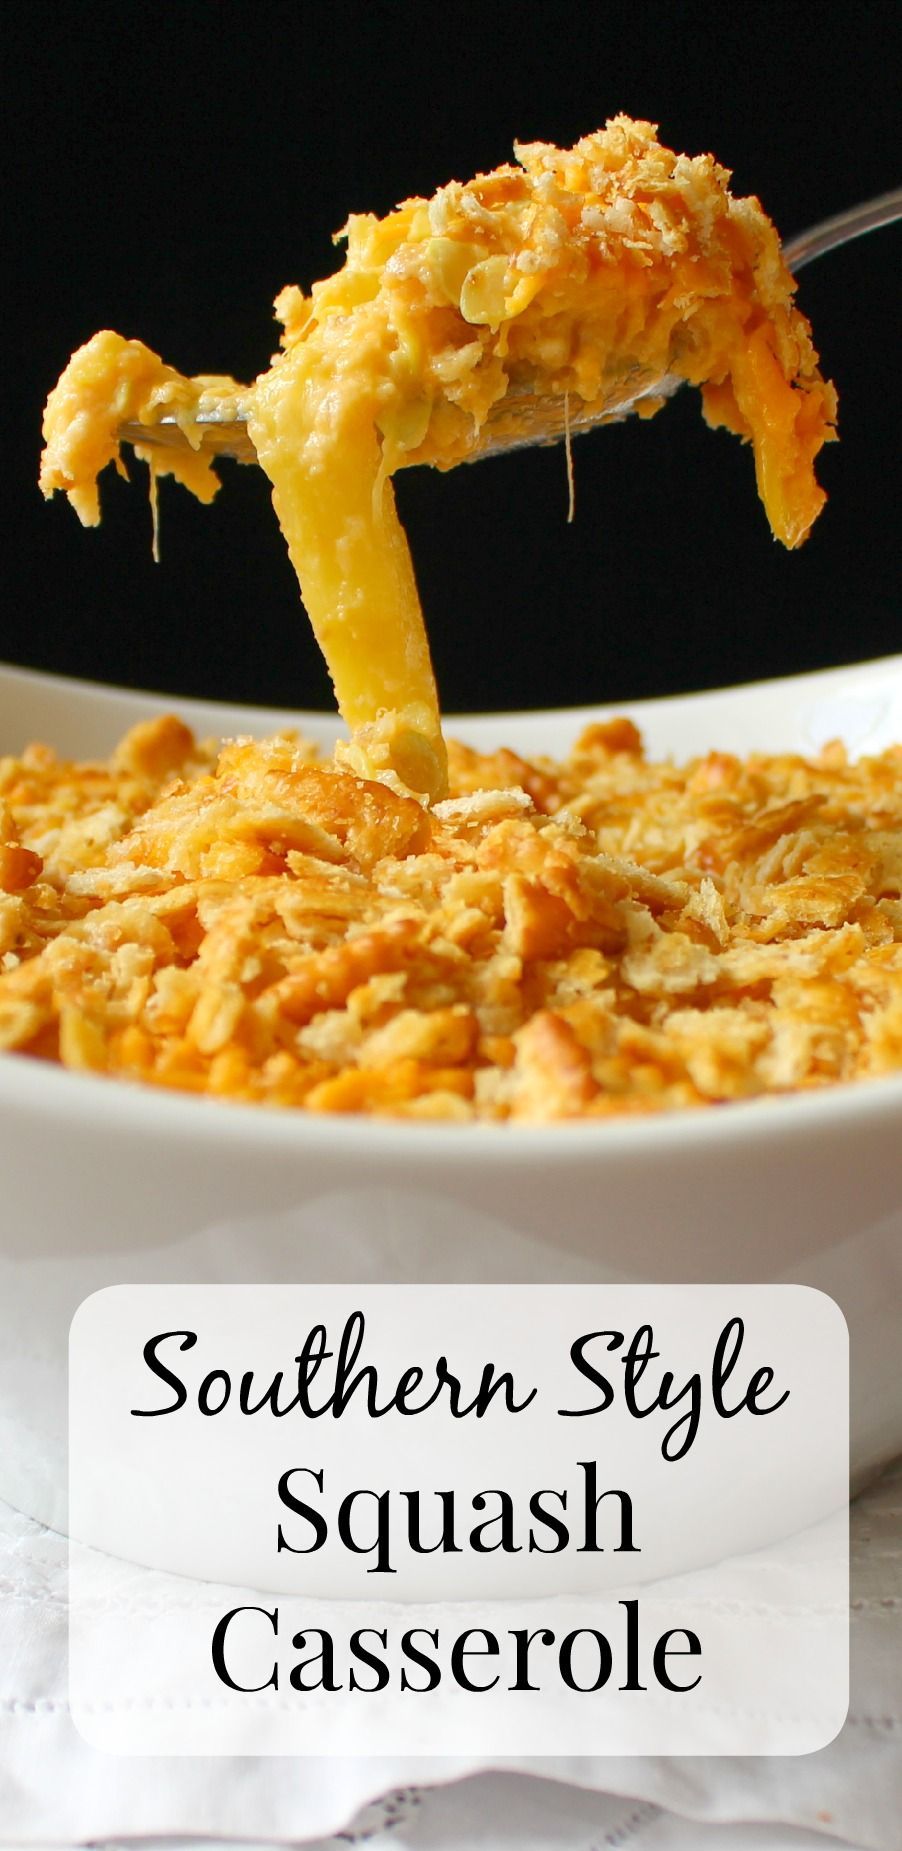 Easy 4 ingredient squash casserole recipe!  Just fresh squash, cheddar cheese, cracker crumbles, and mayo makes this a family